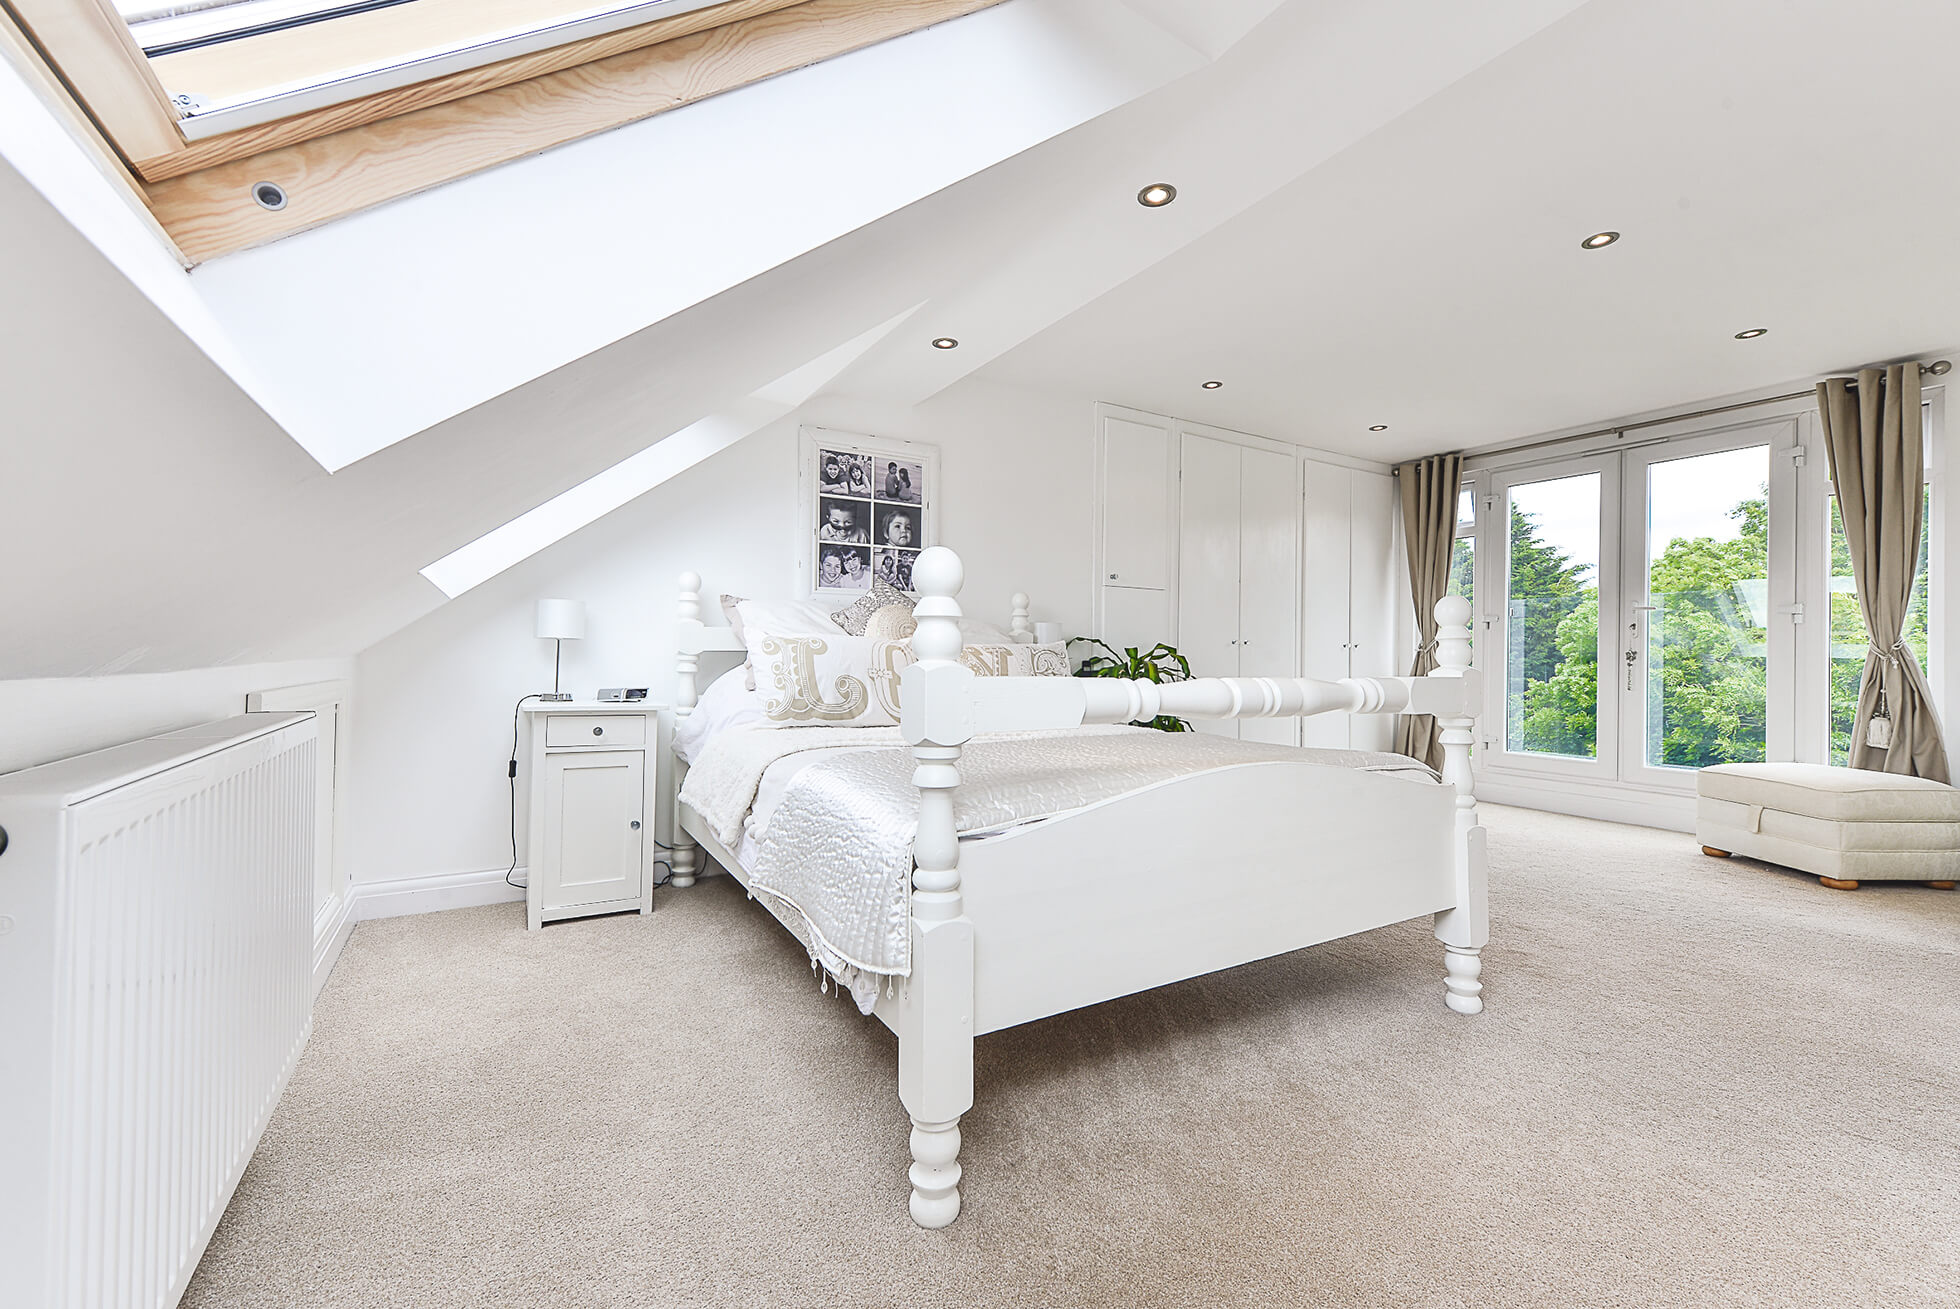 Do you have a question about converting your Loft in Langleybury? Here are the most popular questions asked by our clients.